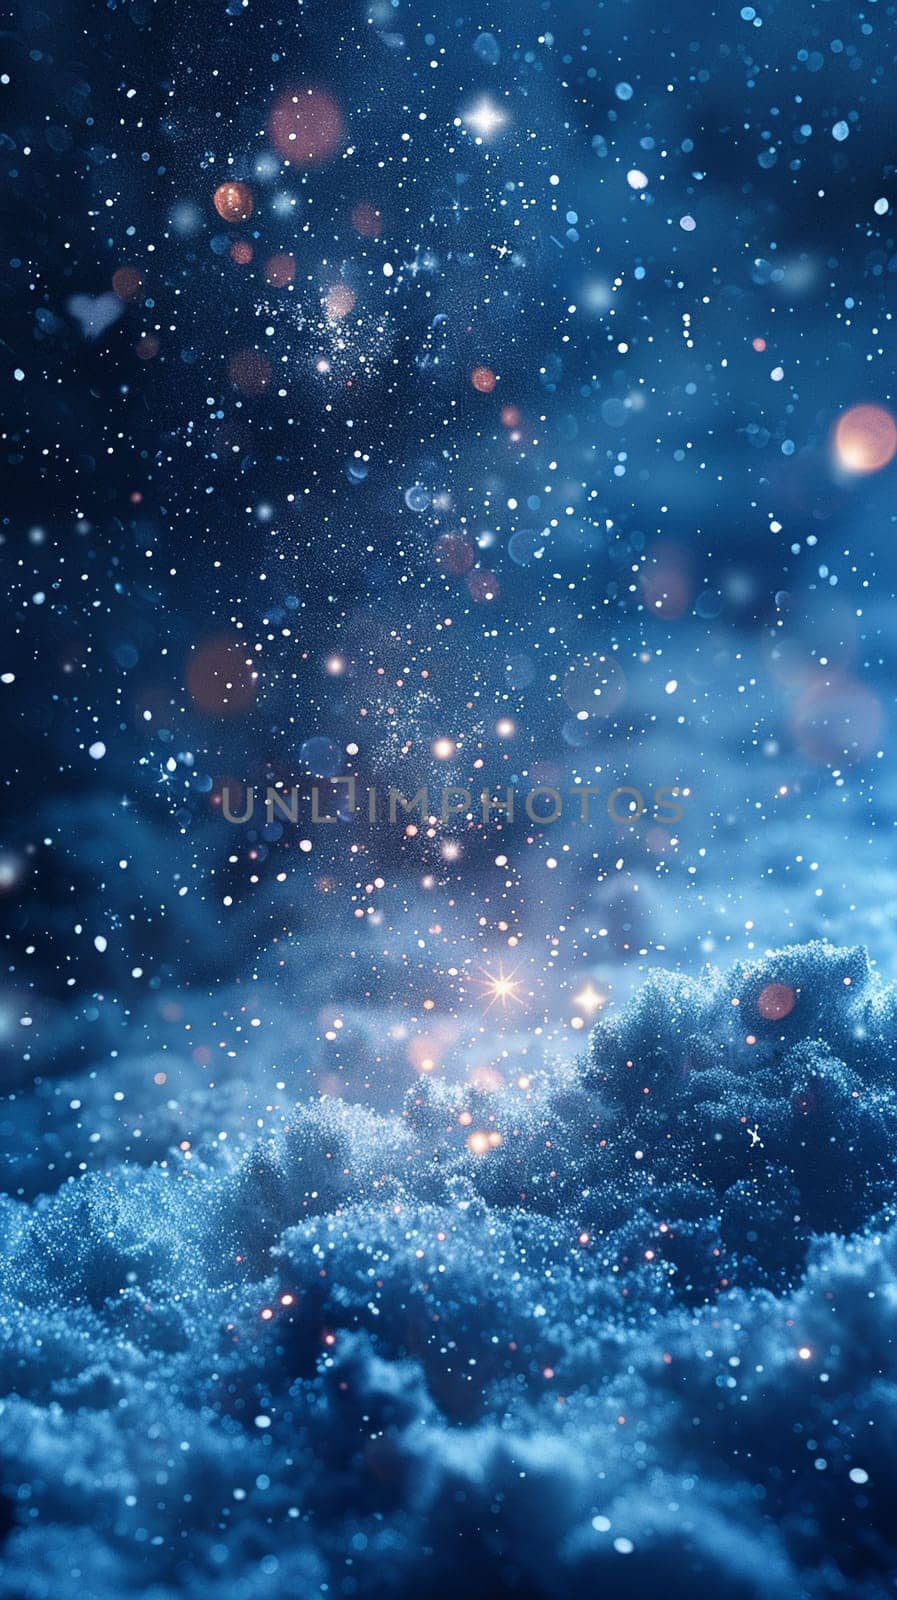 Snowflakes gently falling against the backdrop of a night sky by Benzoix